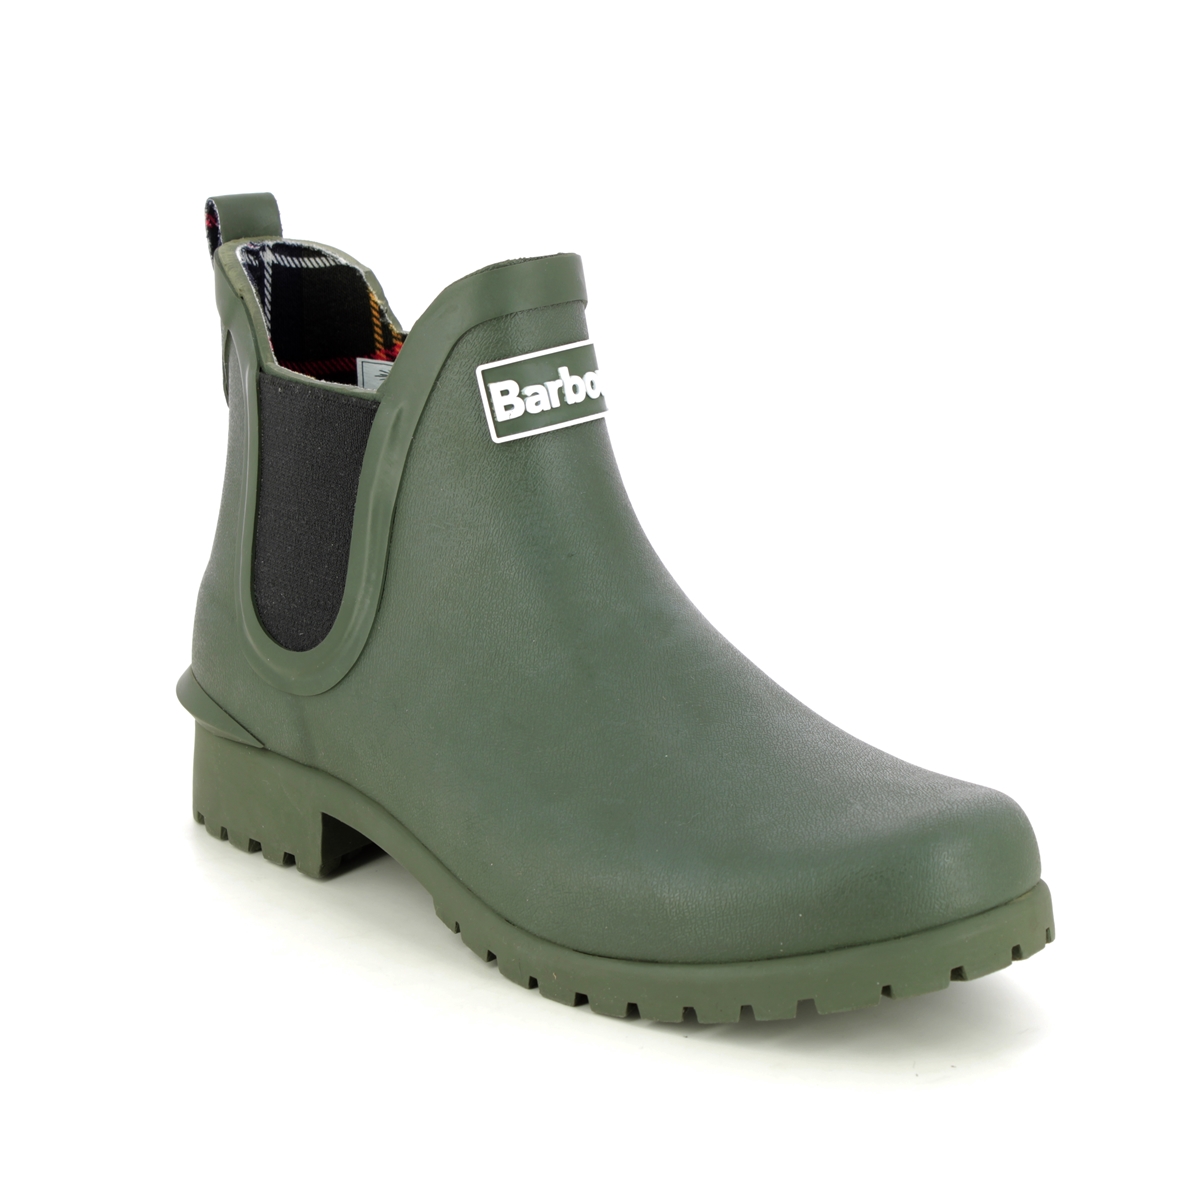 Barbour Wilton Wellie Olive Green Boots Lrf0066-Ol11 In Size 8 In Plain Olive Green